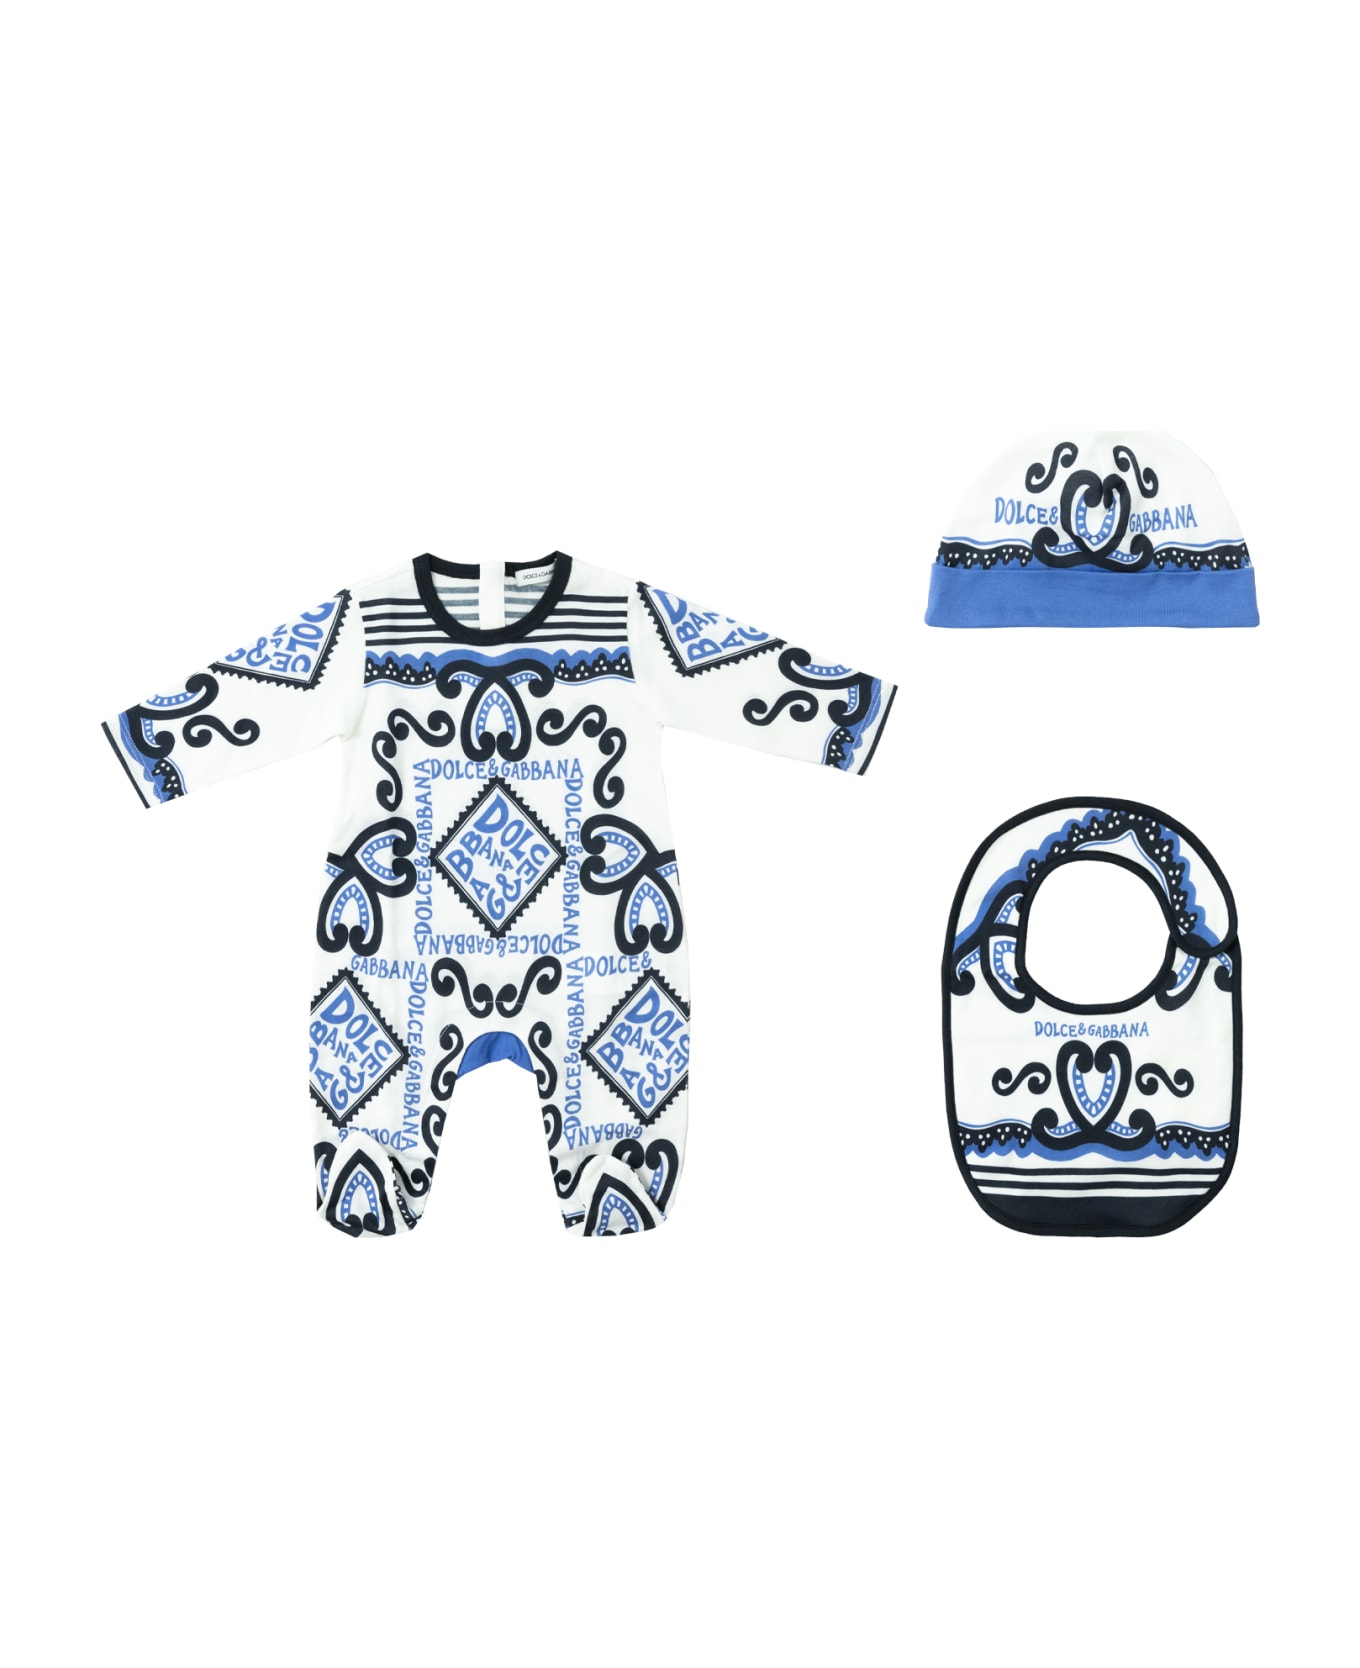 Dolce & Gabbana 3-piece Gift Set With Marine Print - Multicolor